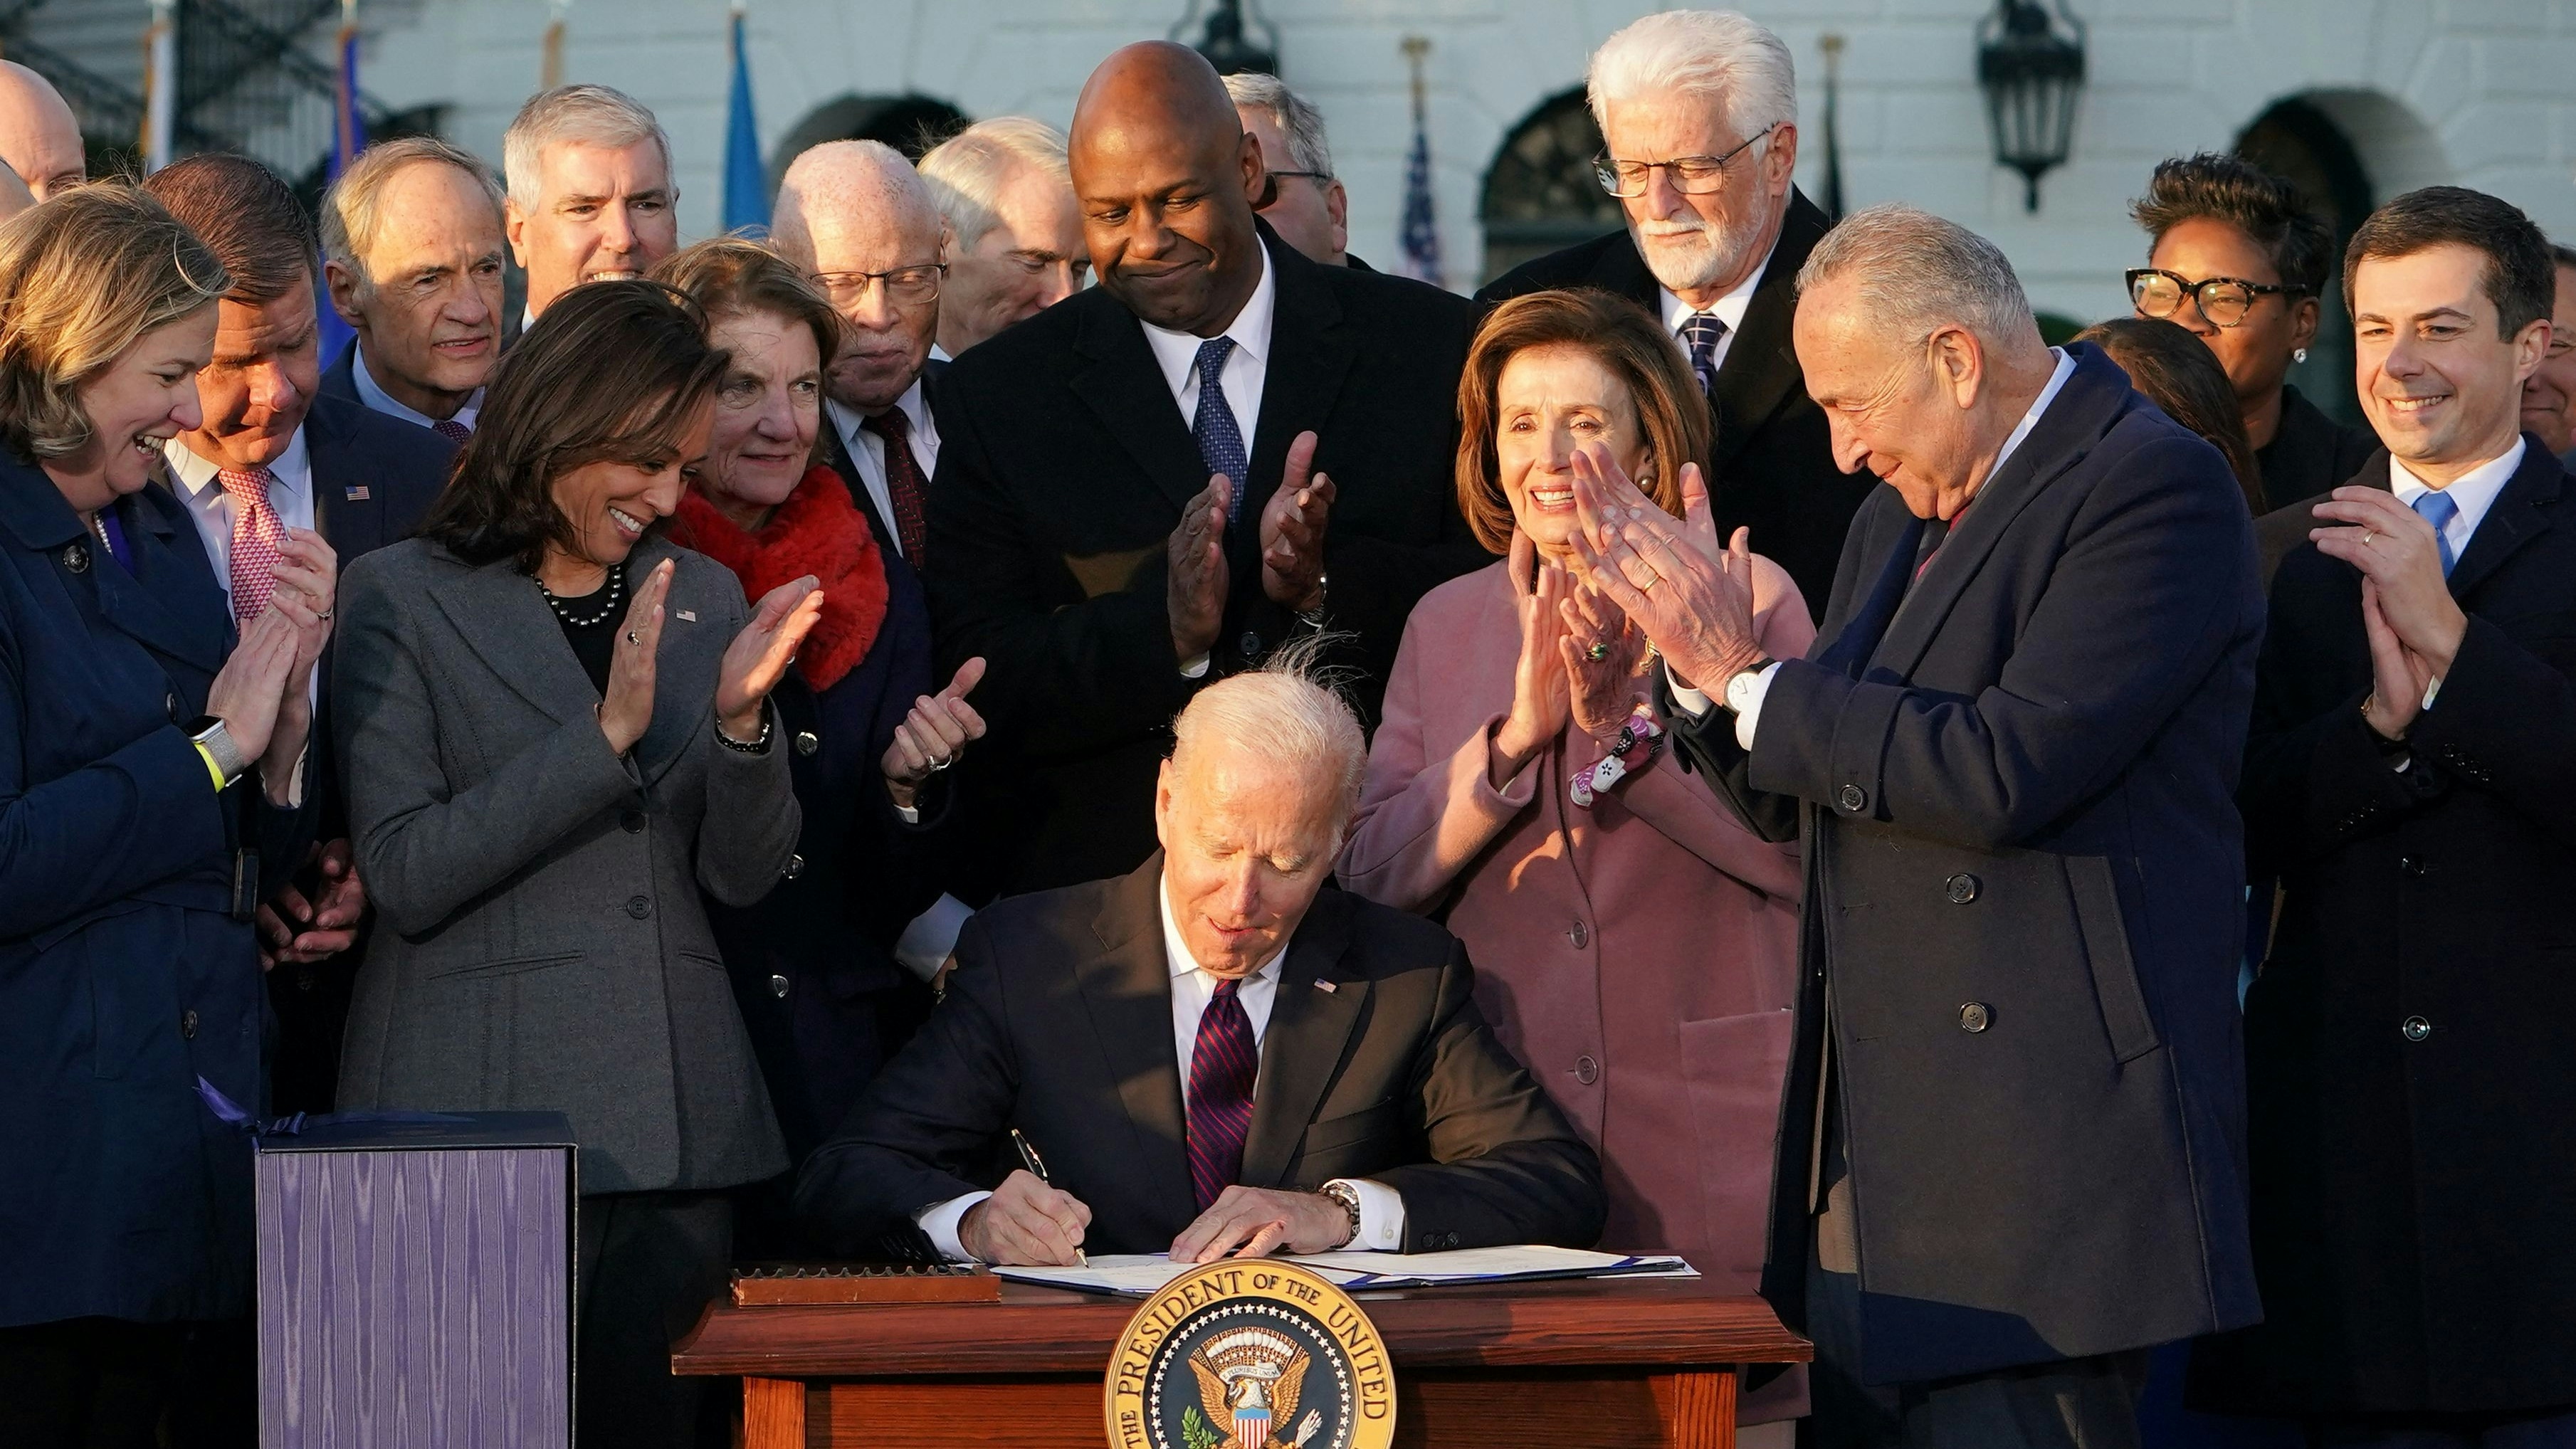 U.S. President Joe Biden signs the Infrastructure Investment and Jobs Act as he is surrounded by lawmakers and members of his Cabinet during a ceremony